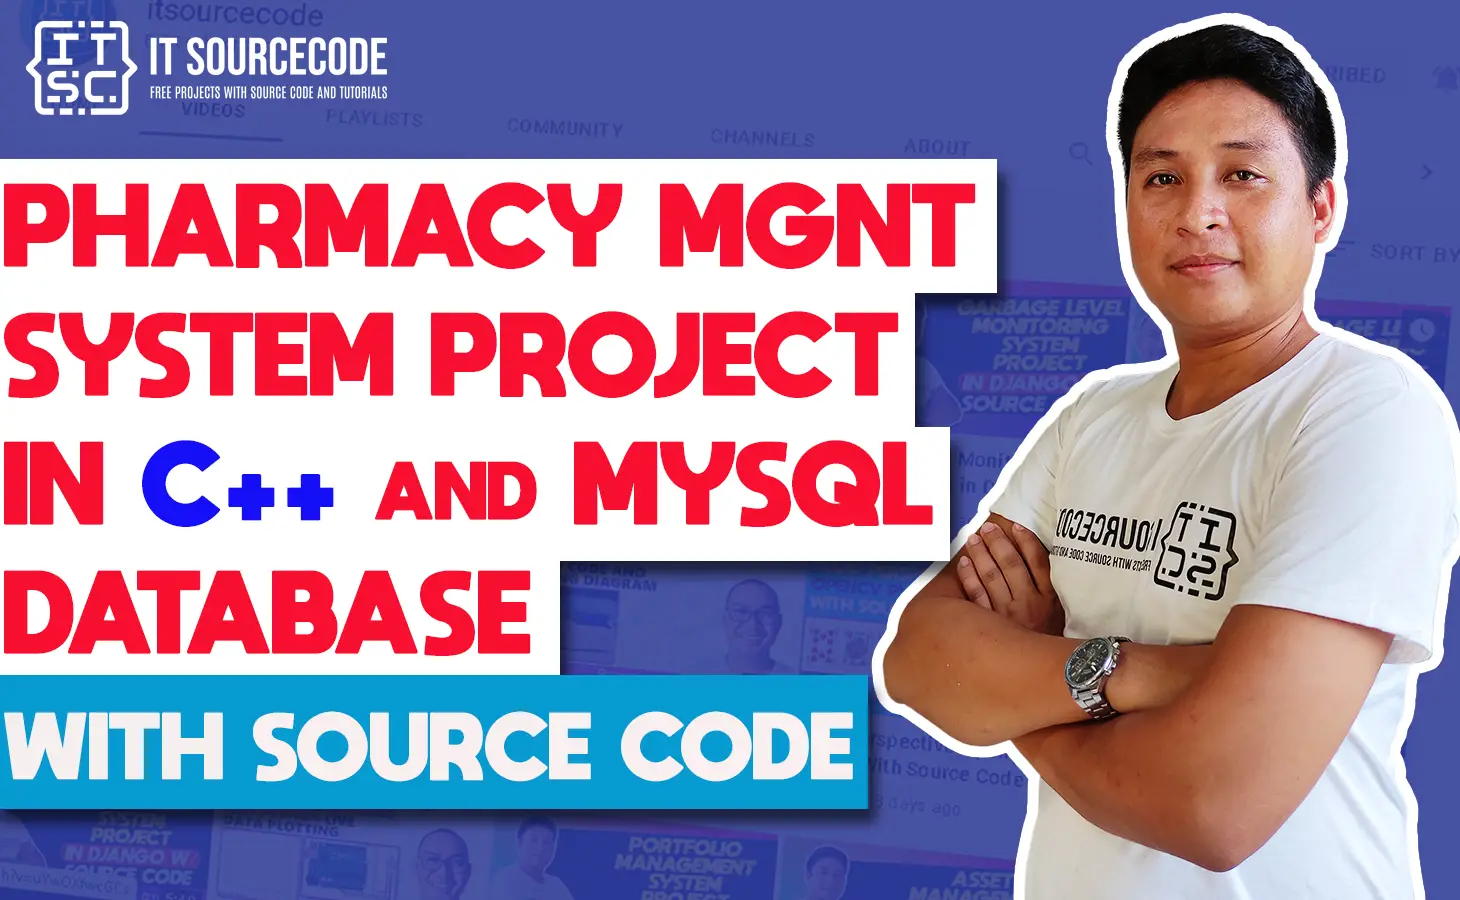 Pharmacy Management System Project in C++ with MySQL Database